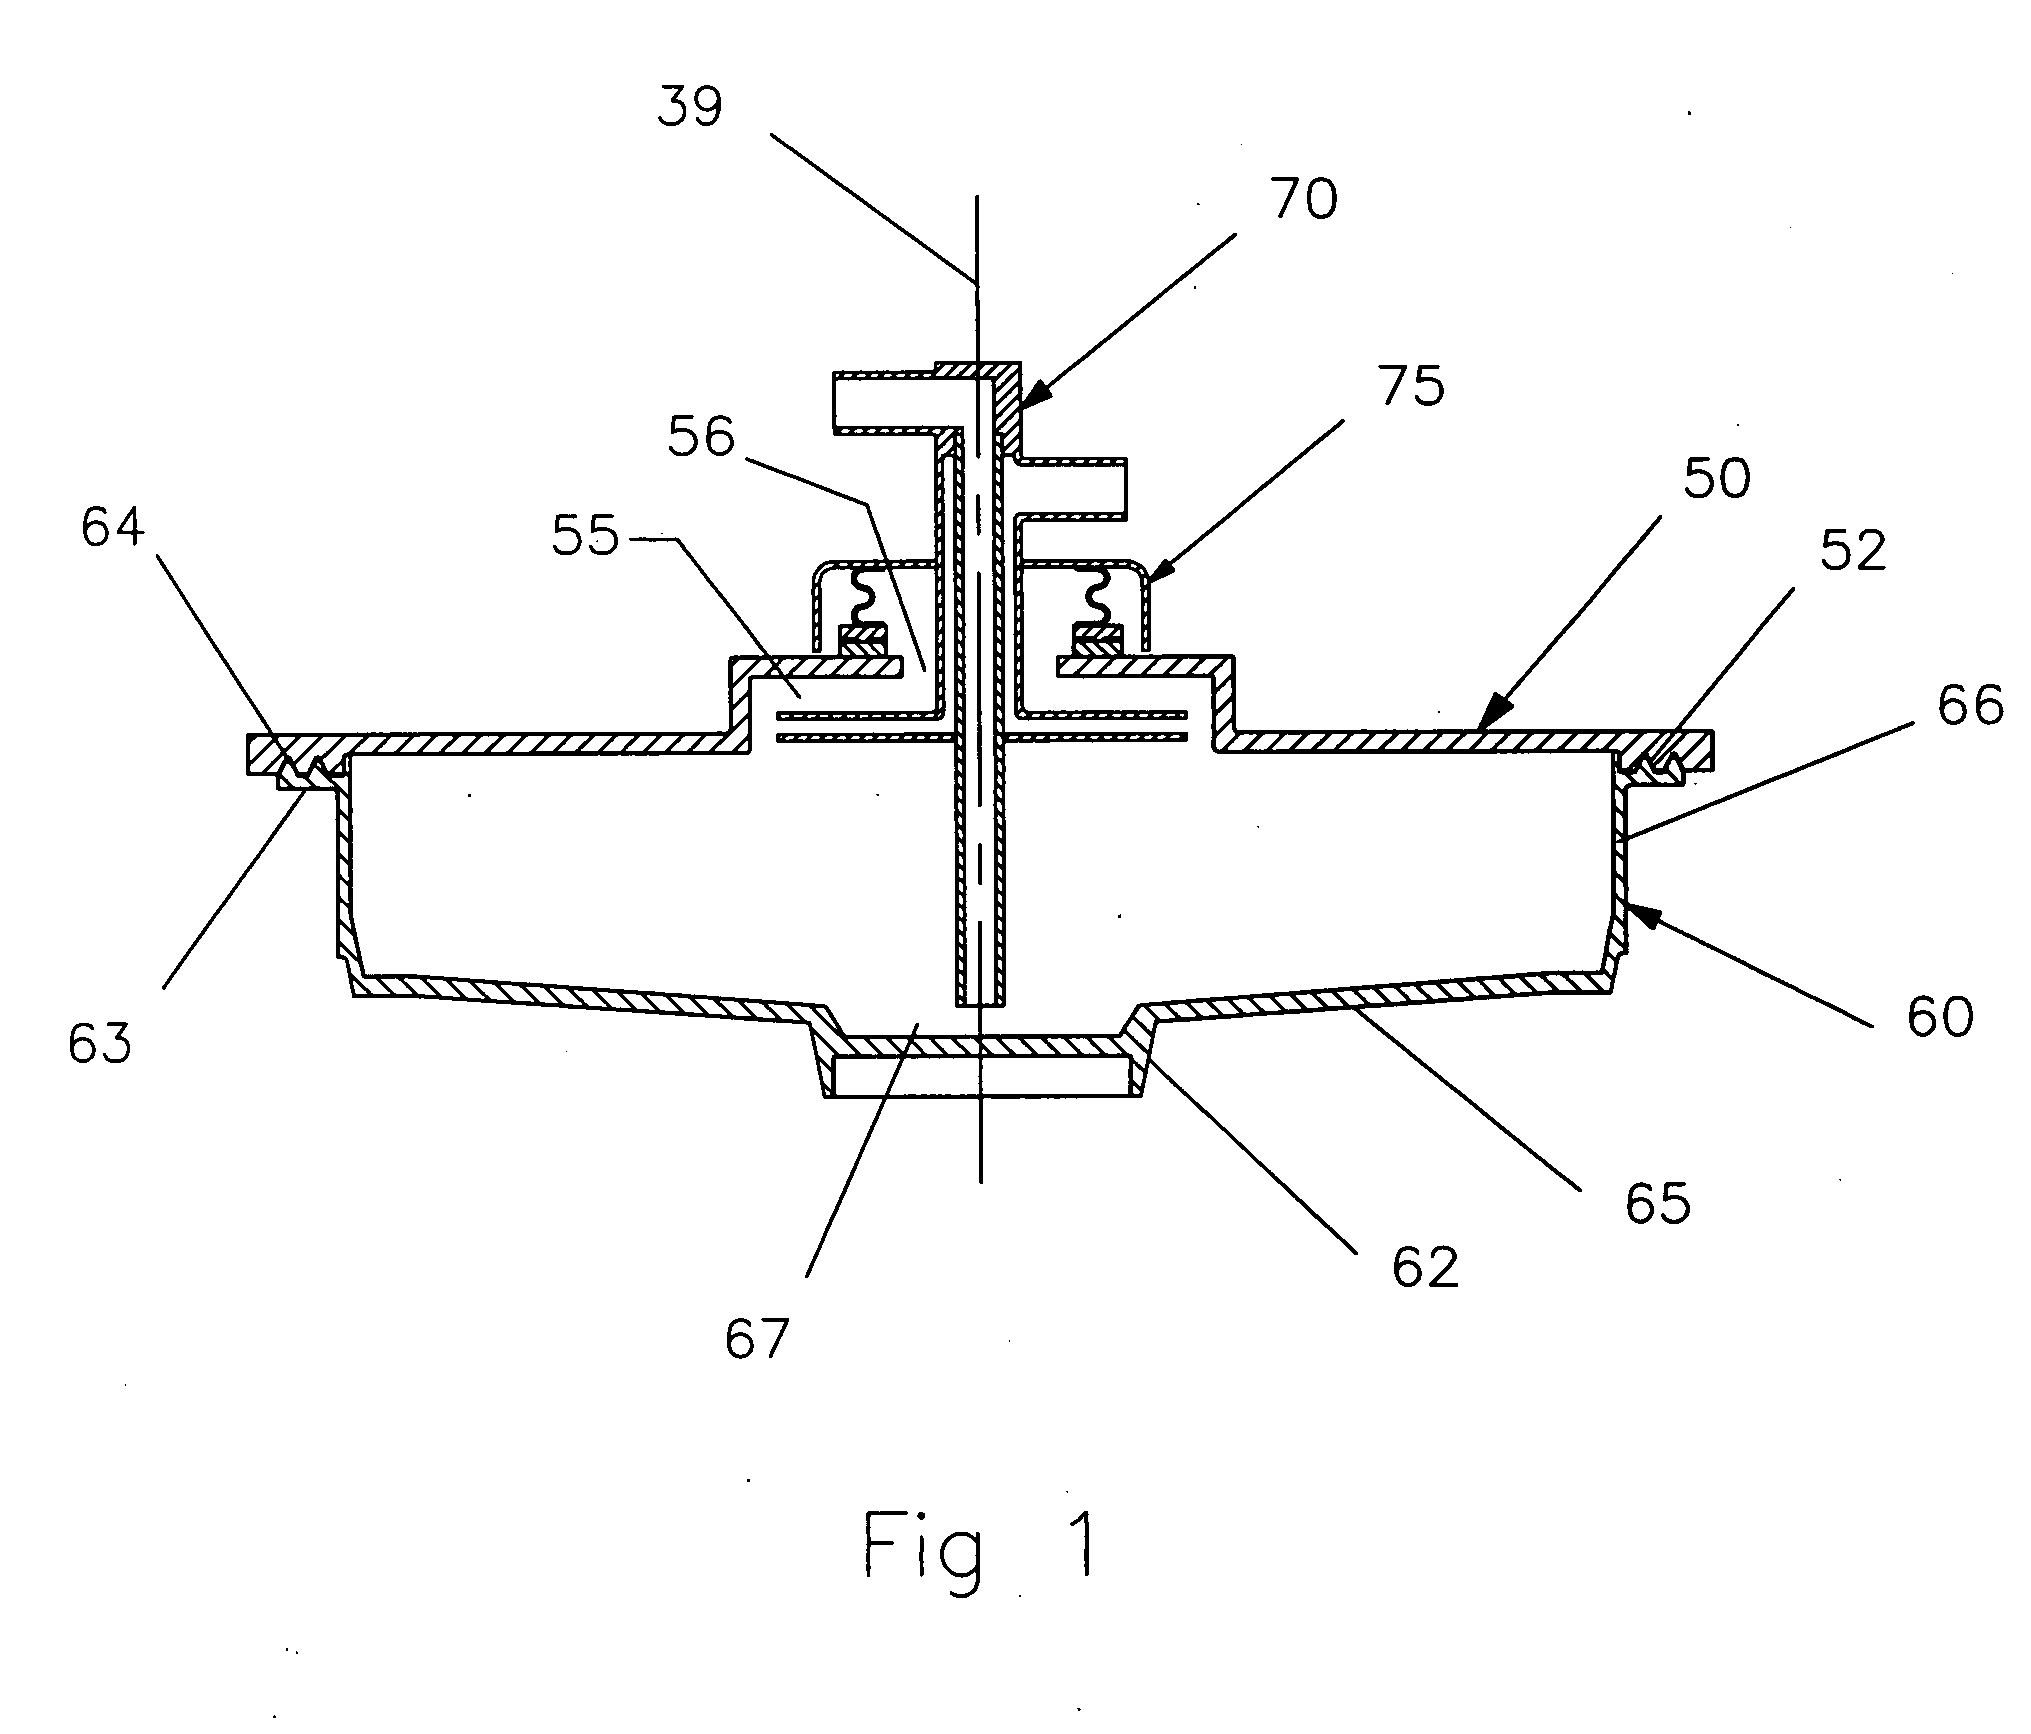 Rotor defining a fluid separation chamber of varying volume